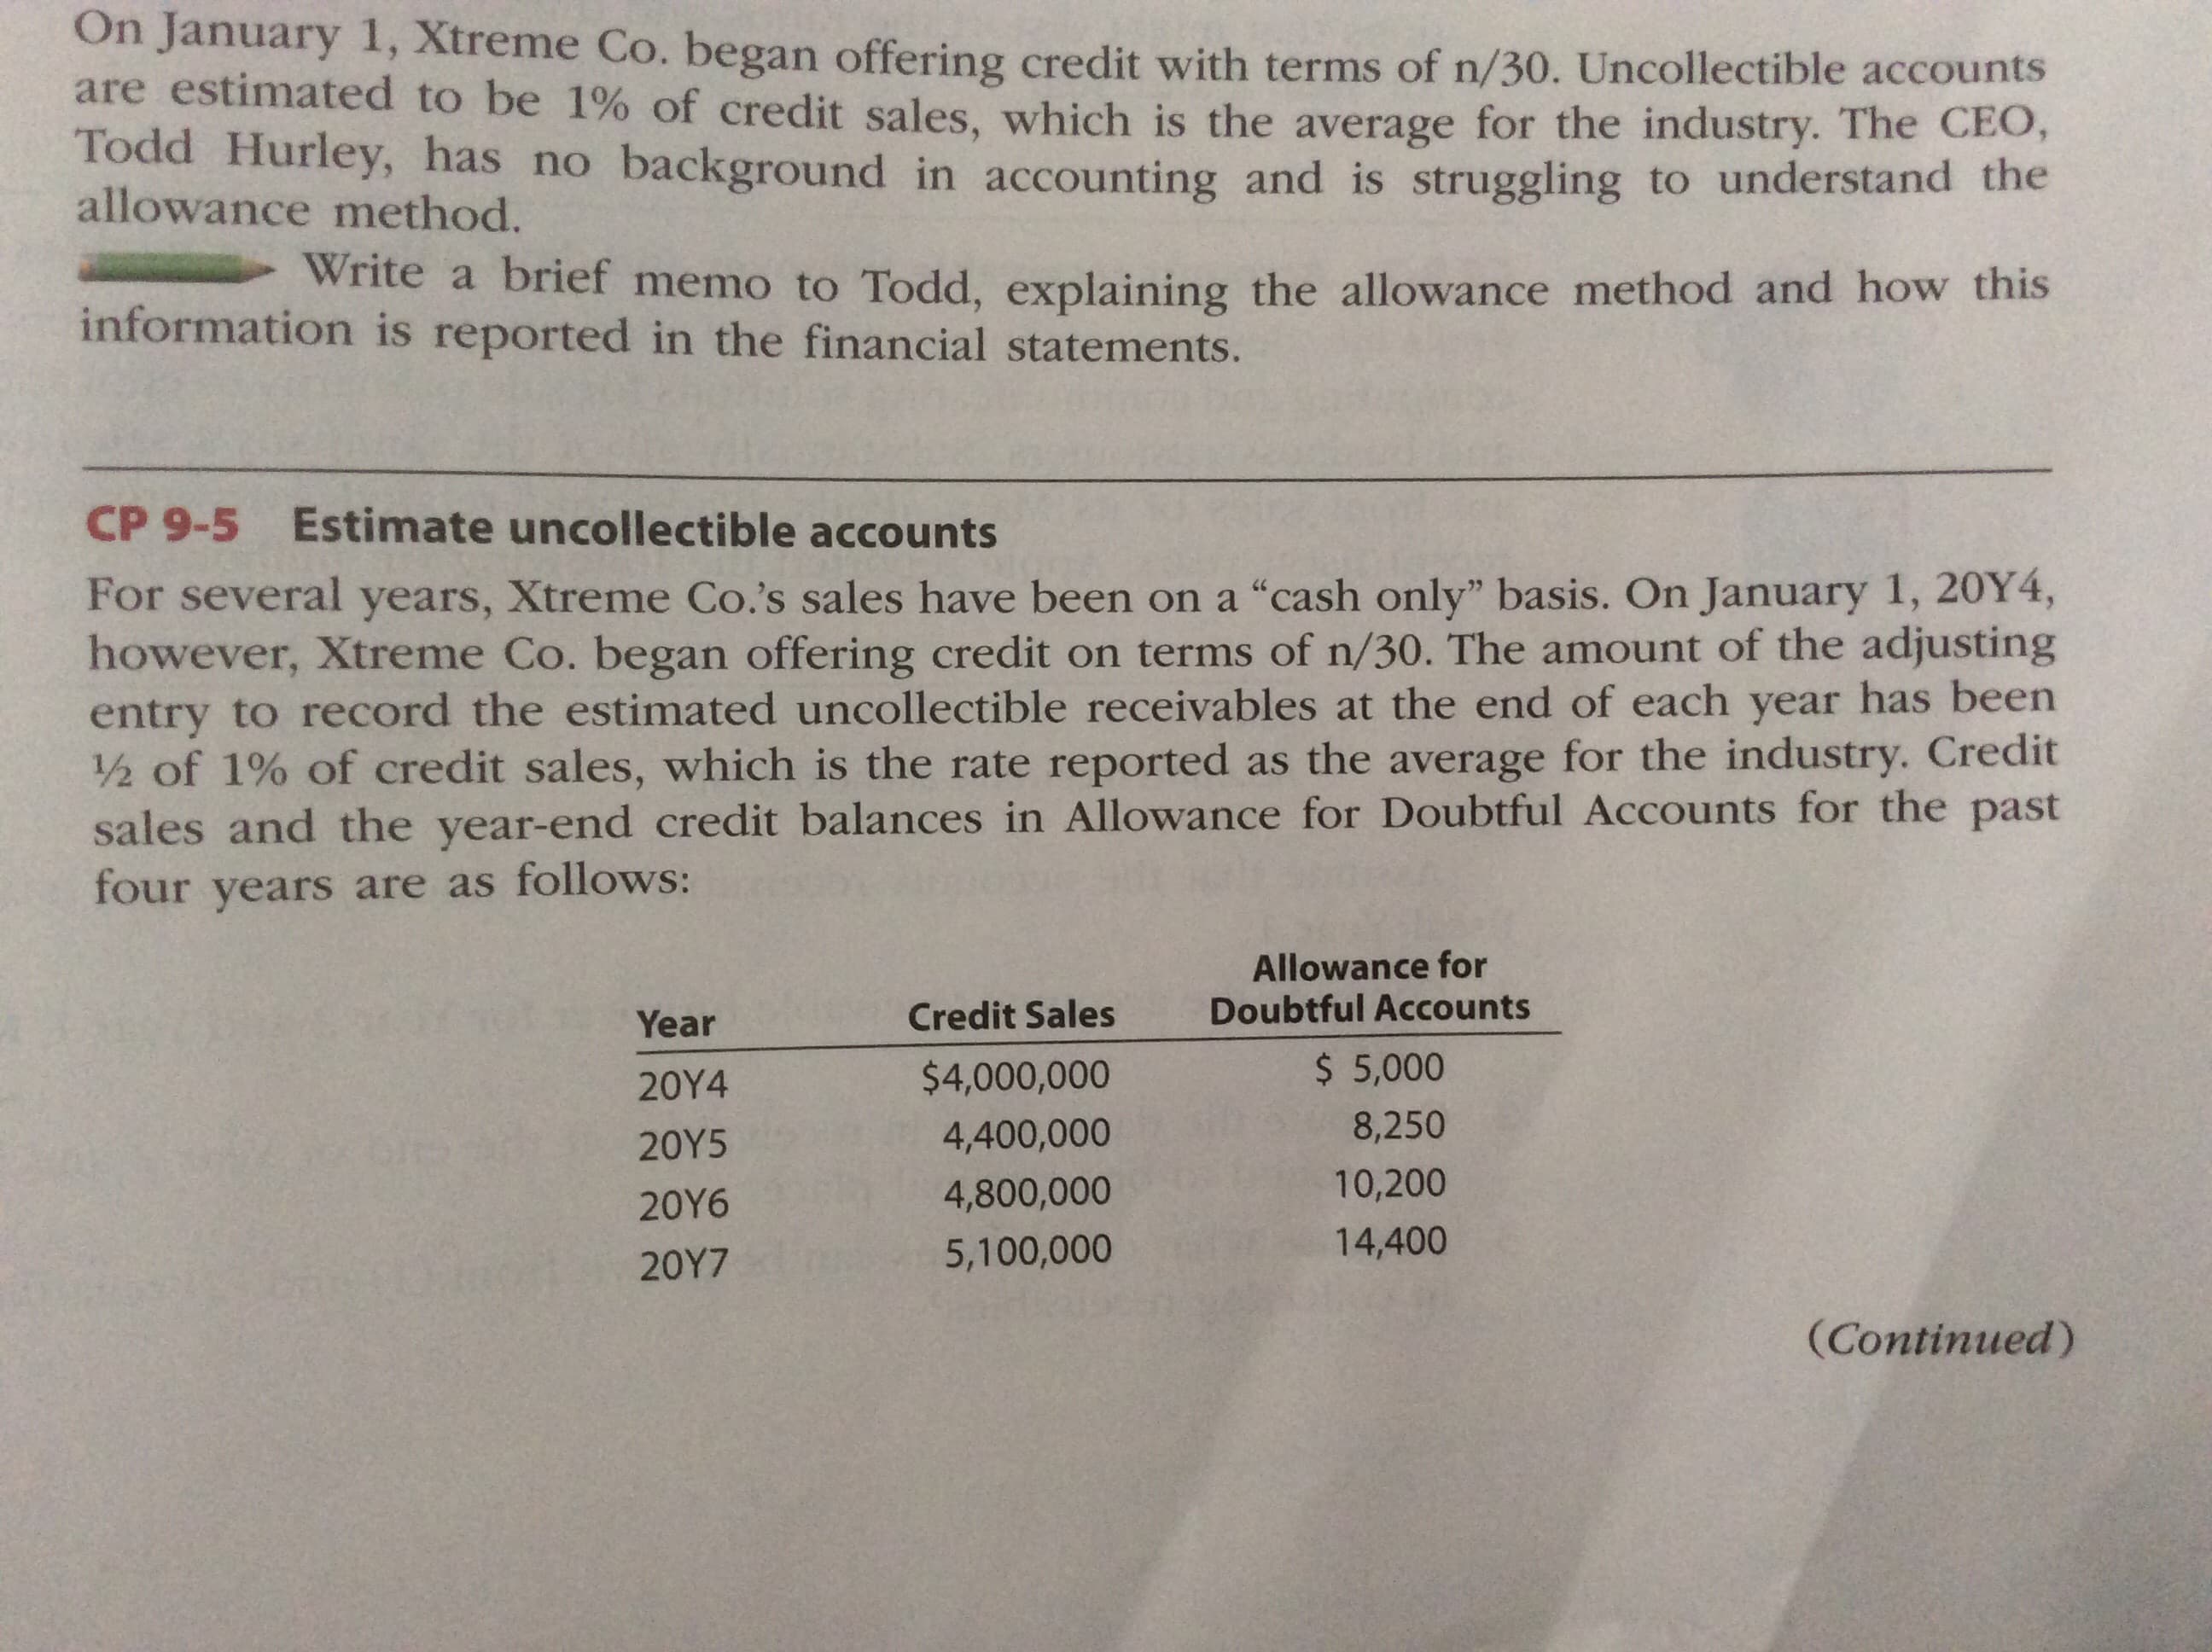 On January 1, Xtreme Co. began offering credit with terms of n/30. Uncollectible accounts
are estimated to be 1% of credit sales, which is the average for the industry. The CEO,
Todd Hurley, has no background in accounting and is struggling to understand the
allowance method.
Write a brief memo to Todd, explaining the allowance method and how this
information is reported in the financial statements.
CP 9-5
Estimate uncollectible accounts
For several years, Xtreme Co.'s sales have been on a "cash only" basis. On January 1, 20Y4,
however, Xtreme Co. began offering credit on terms of n/30. The amount of the adjusting
entry to record the estimated uncollectible receivables at the end of each year has been
2 of 1% of credit sales, which is the rate reported as the average for the industry. Credit
sales and the year-end credit balances in Allowance for Doubtful Accounts for the past
four years are as follows:
Allowance for
Doubtful Accounts
Credit Sales
Year
$ 5,000
$4,000,000
20Y4
8,250
4,400,000
20Y5
10,200
4,800,000
20Y6
14,400
5,100,000
20Υ7
(Continued)
